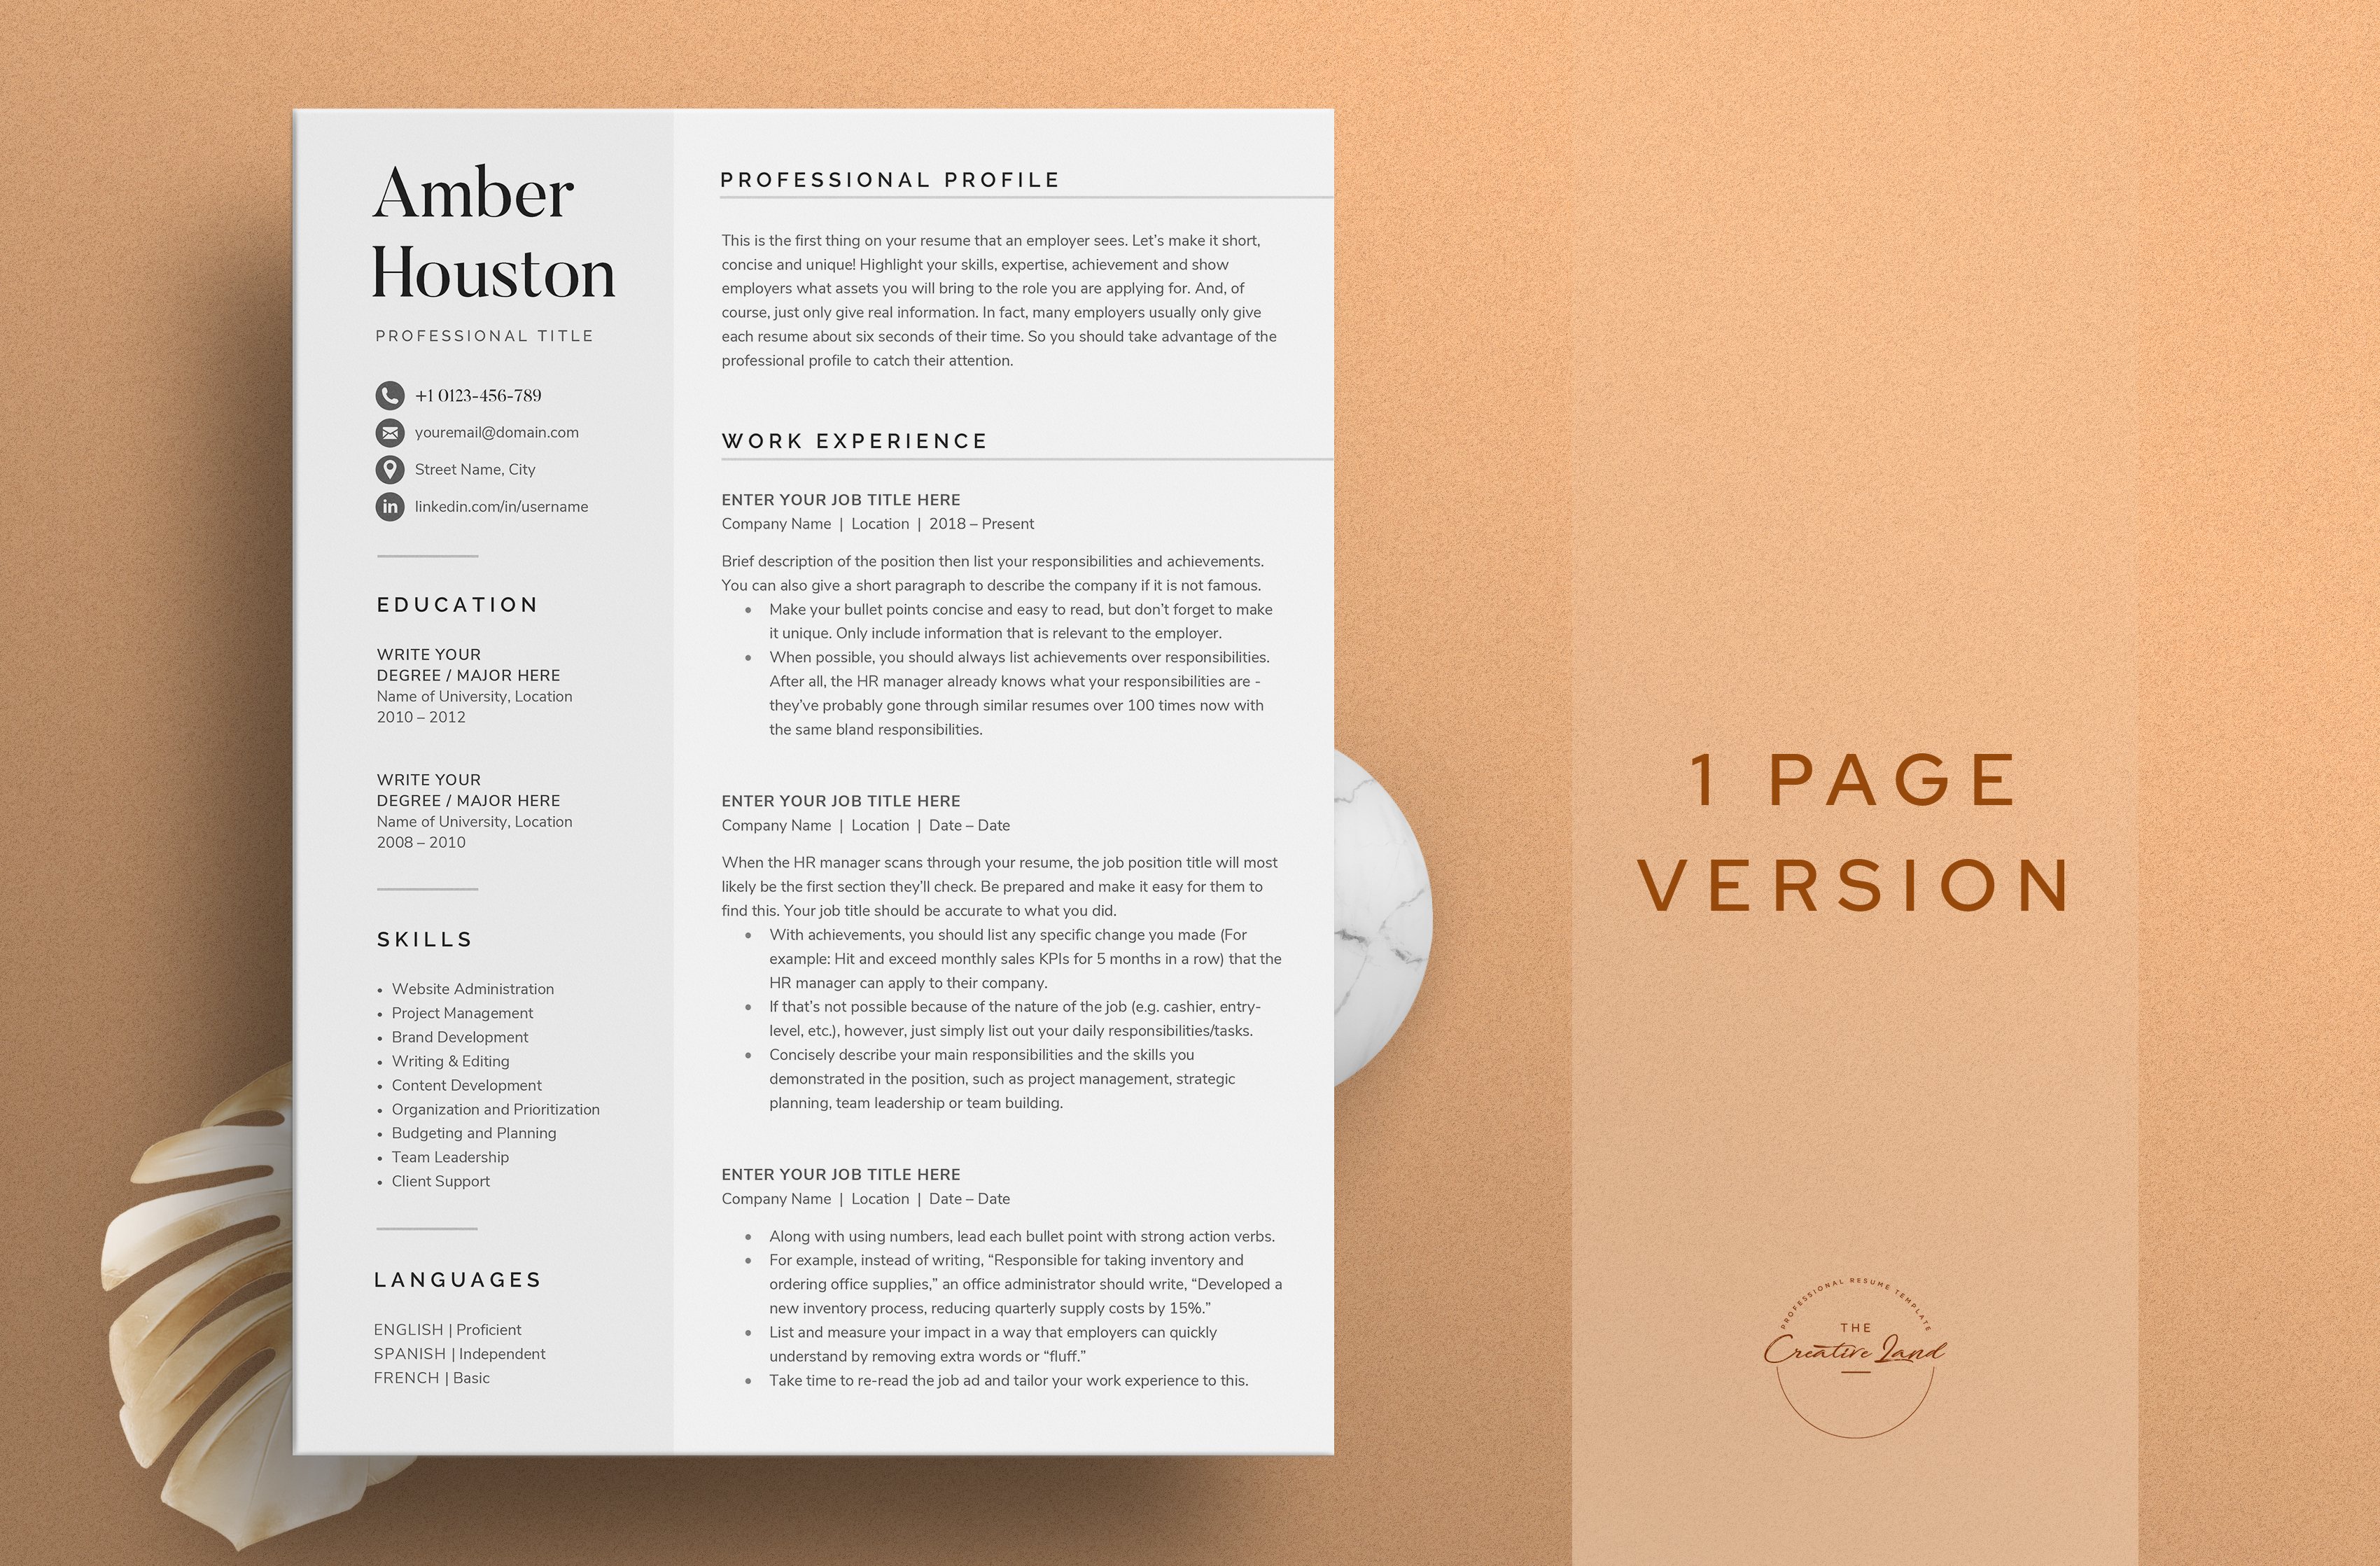 Resume/CV - The Amber preview image.